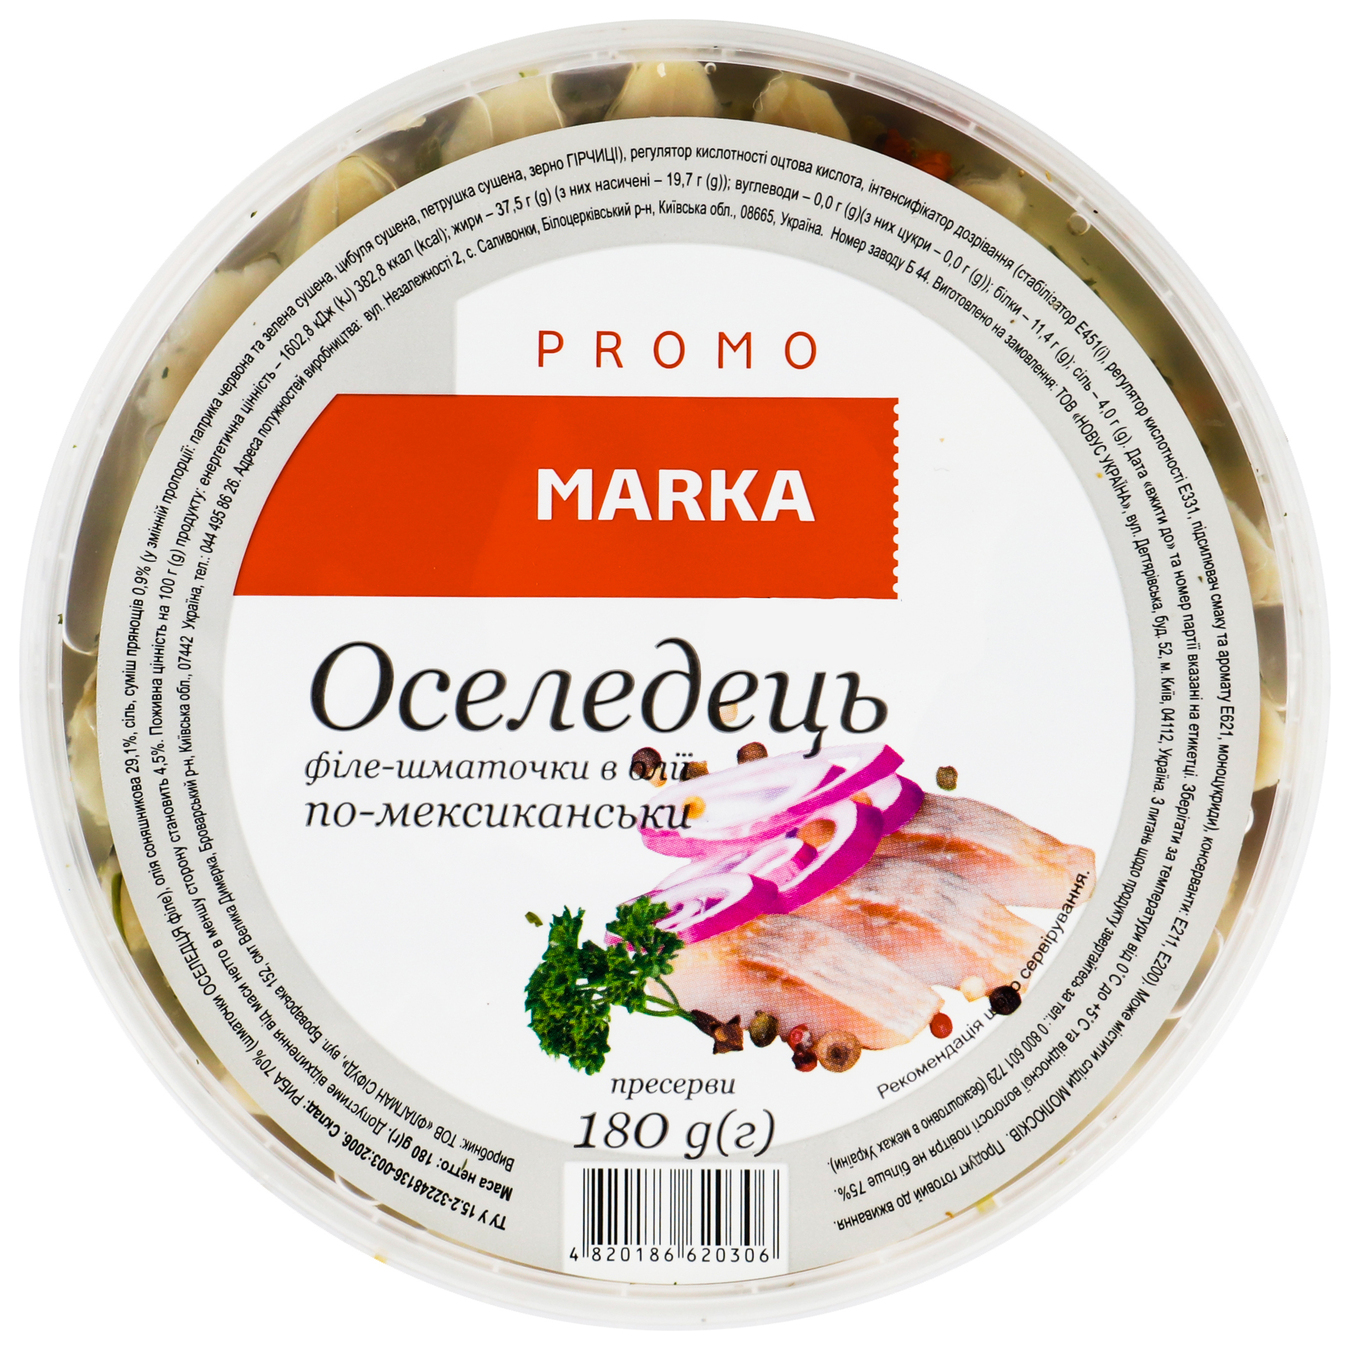 Marka Promo In Oil Mexican Herring Fillet Pieces 180g